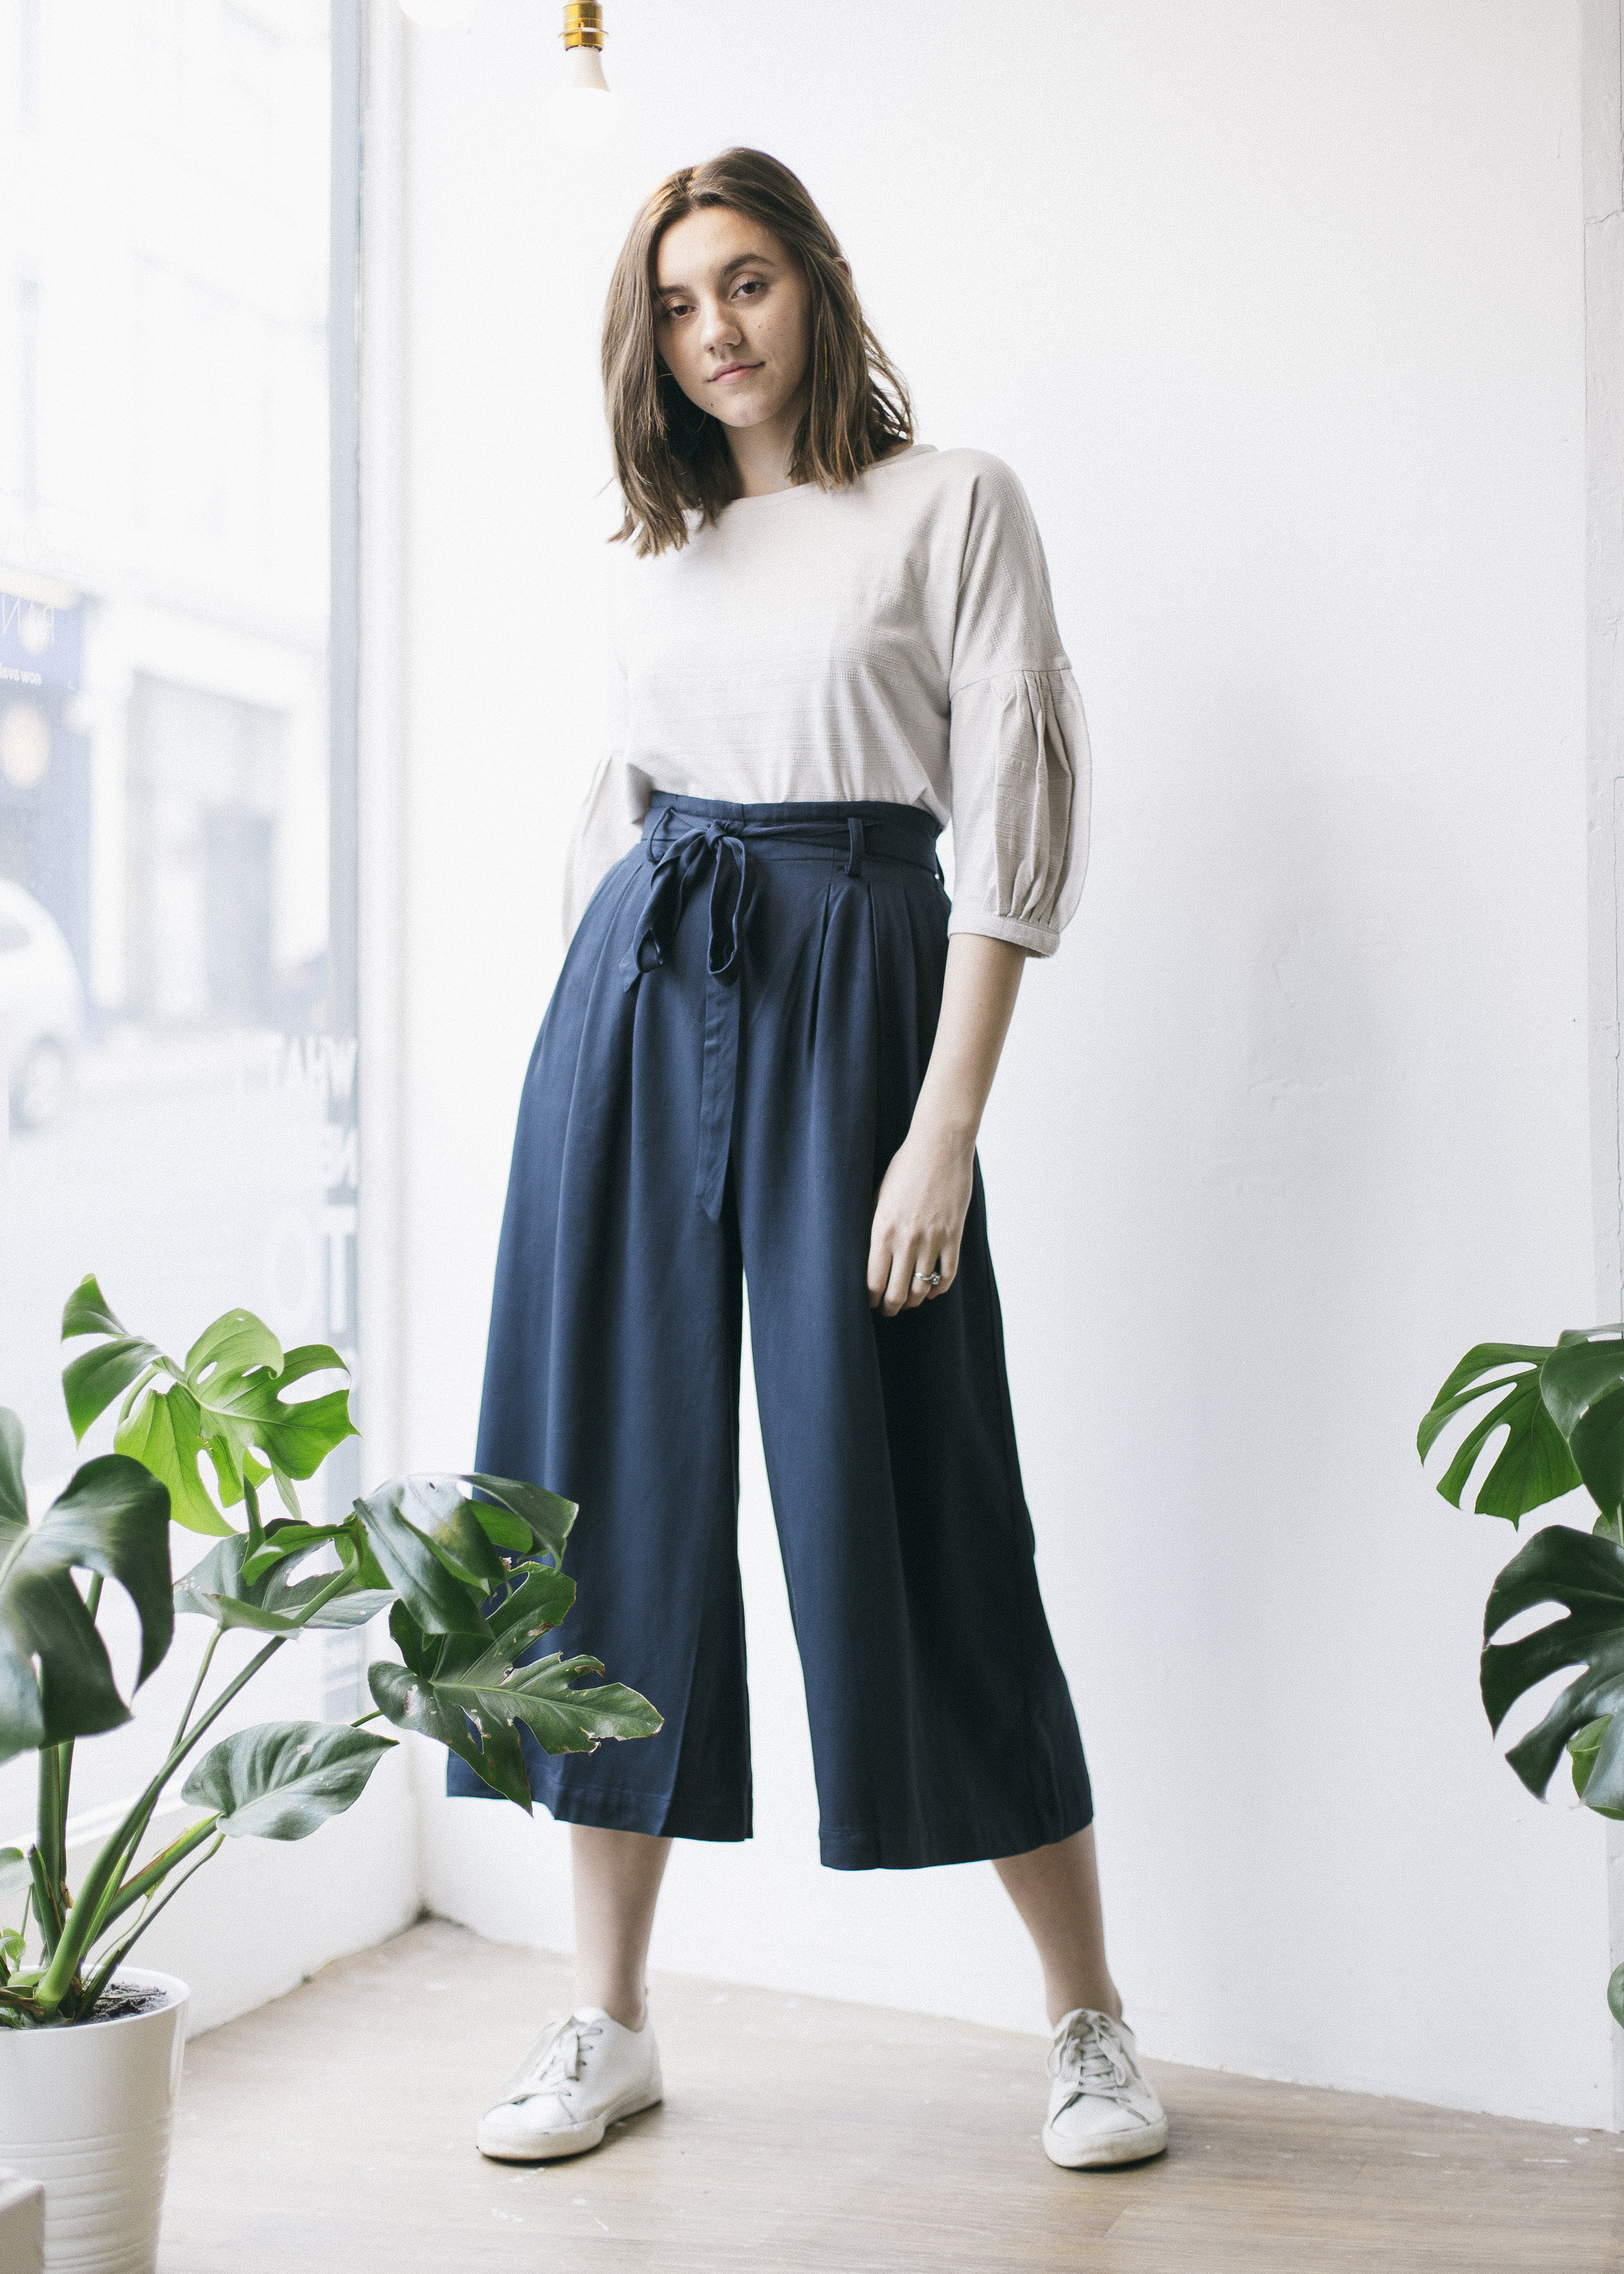 Robyn in Thought Culottes.jpg